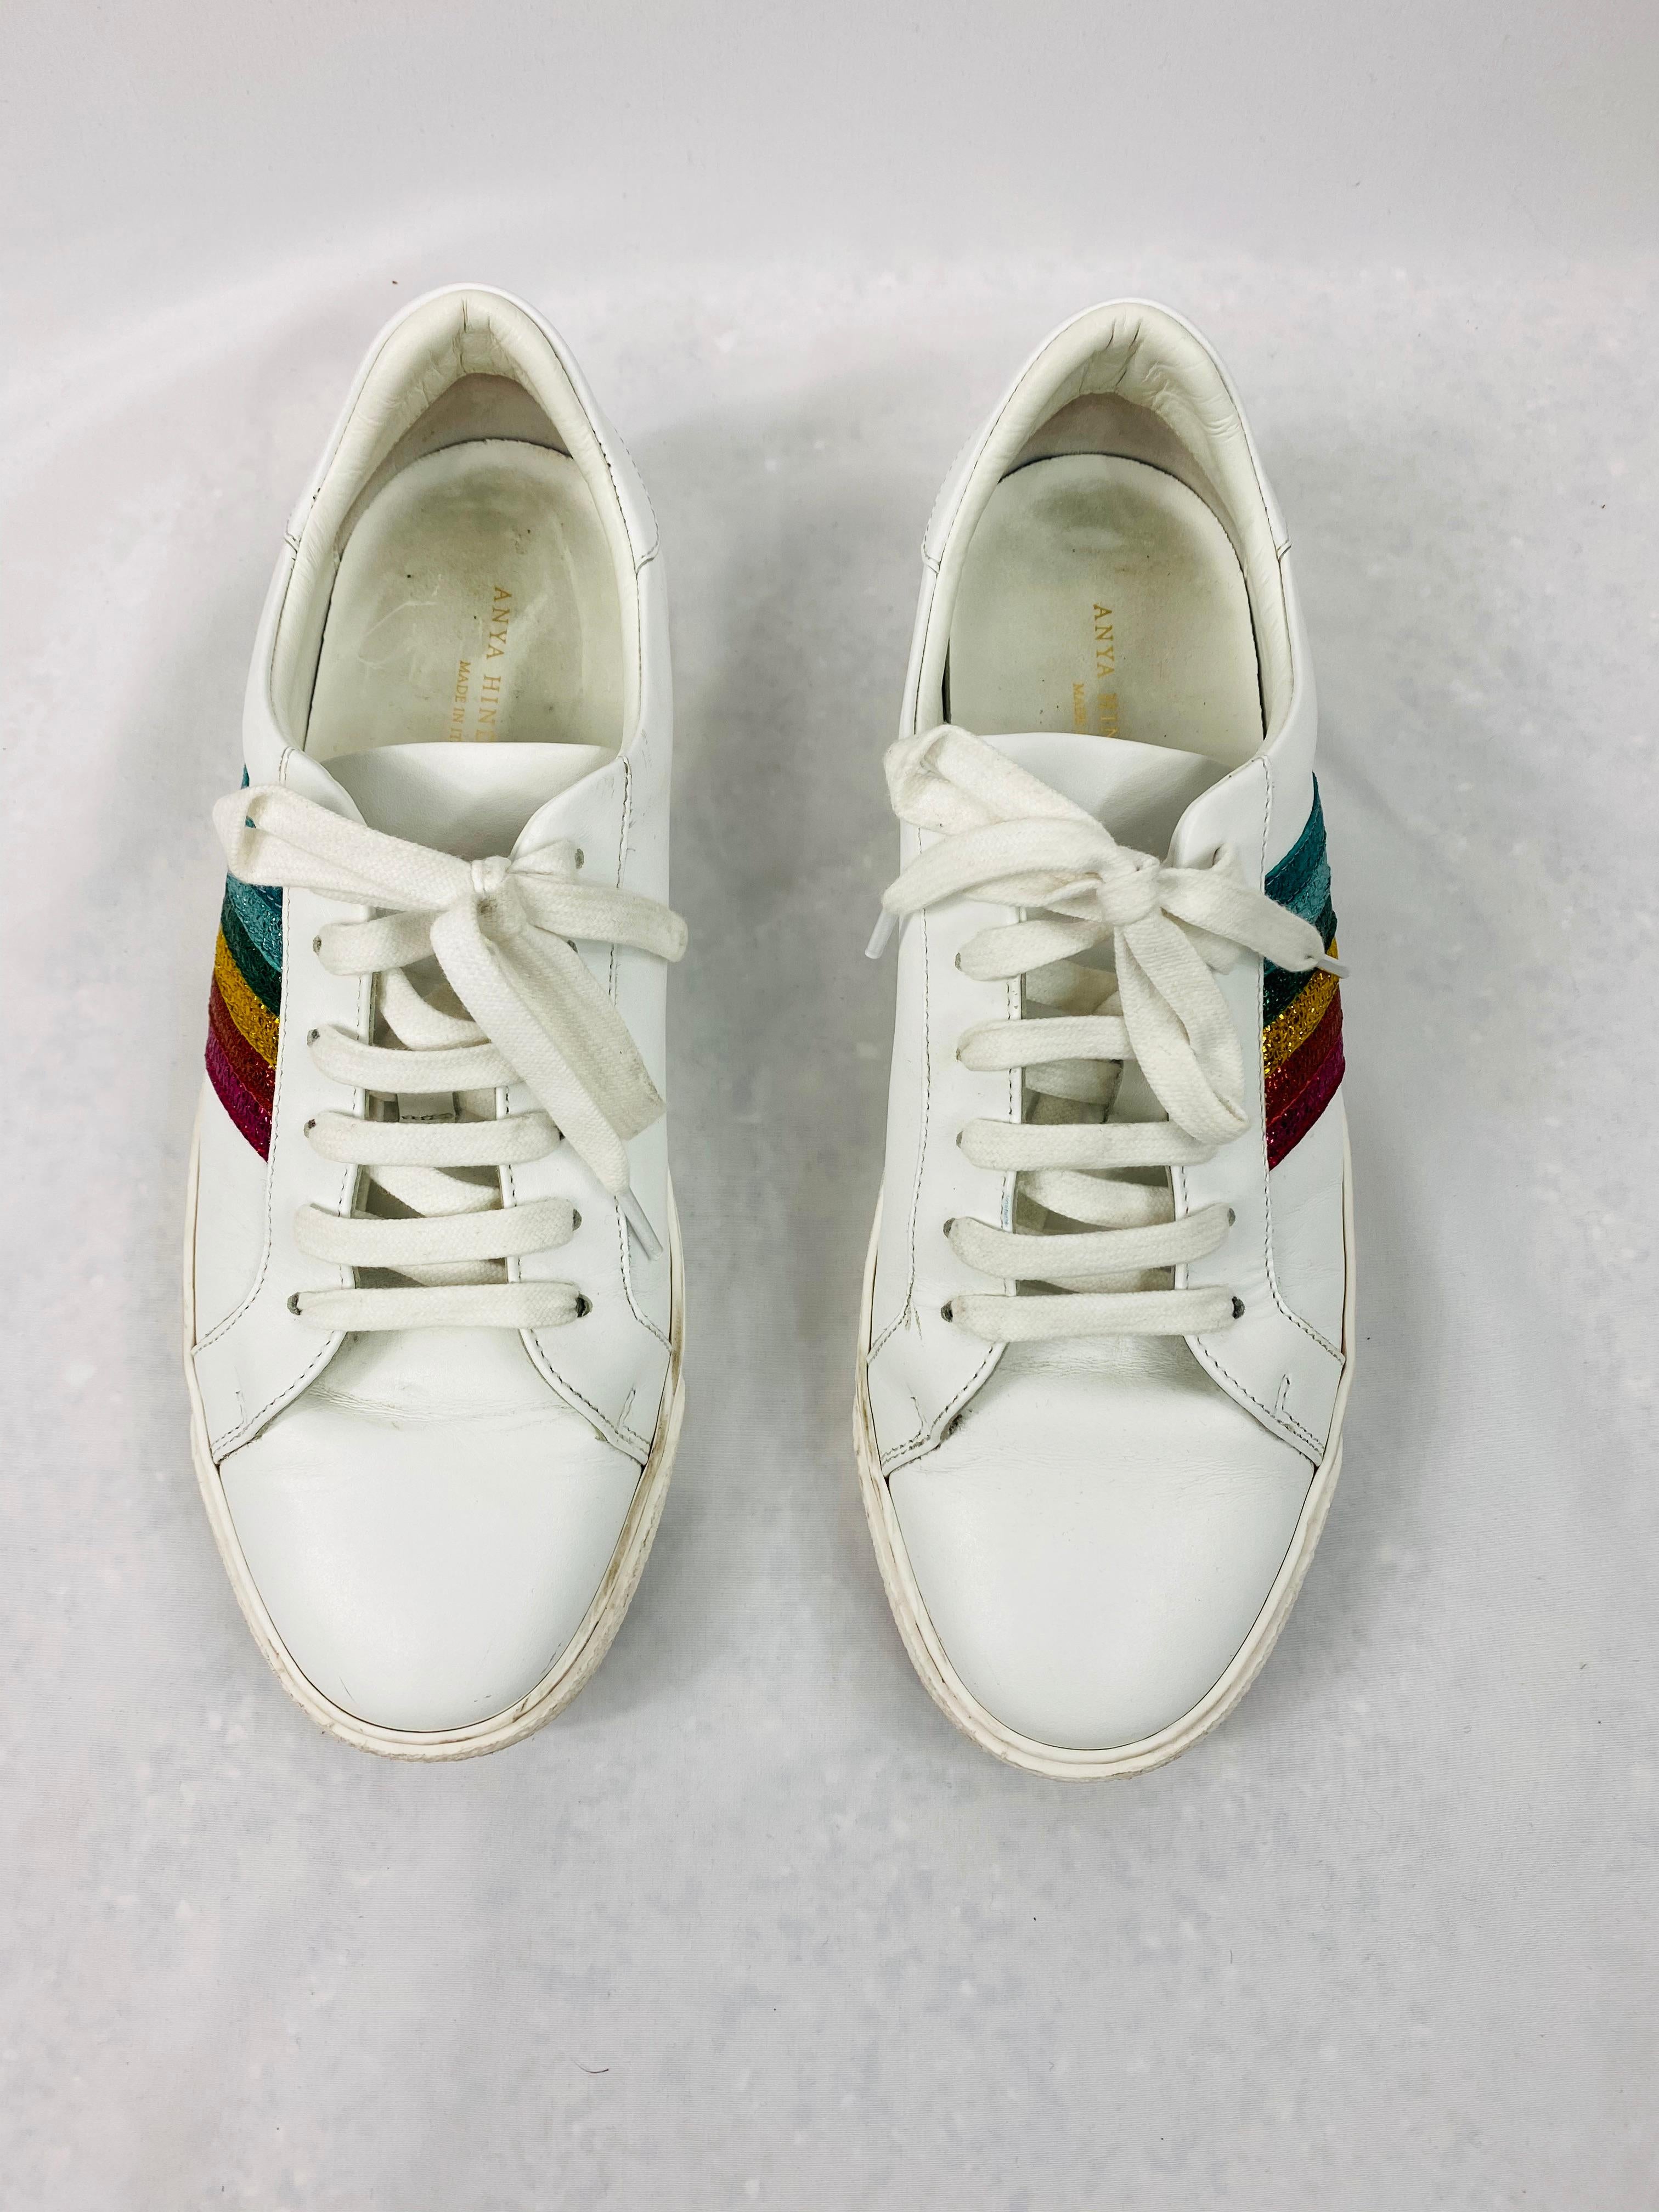 Anya Hindmarch White Leather Sneakers Size 39 For Sale 2